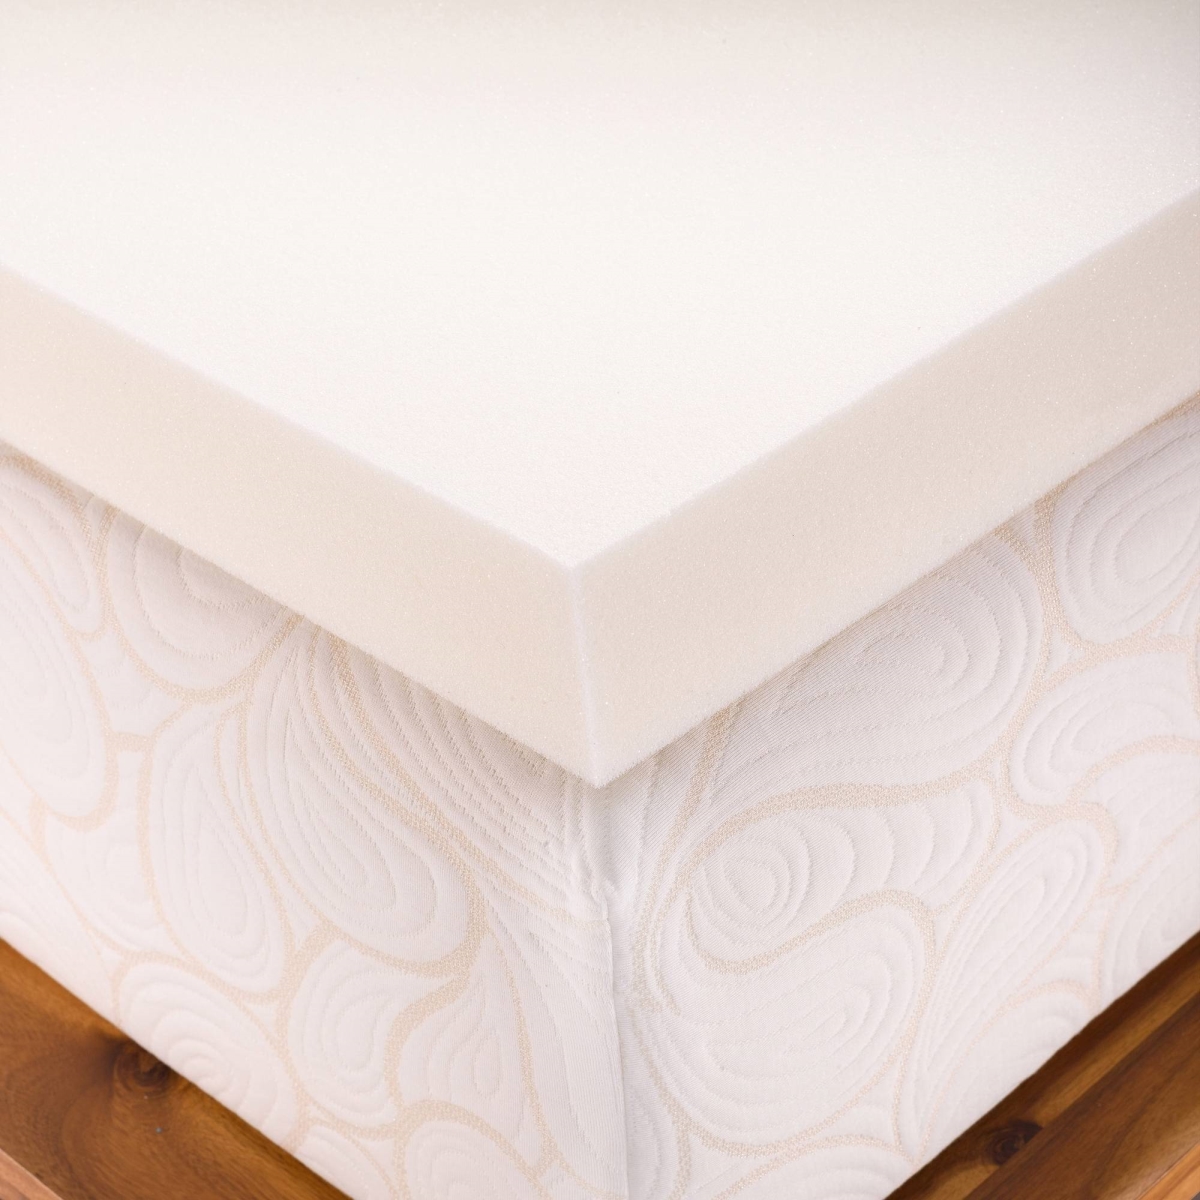 Picture of Memory Foam Solutions UBSPUMC2802 California King 2 Inch Thick  Medium Firm Conventional Polyurethane Foam Mattress Pad Bed Topper Made in the USA